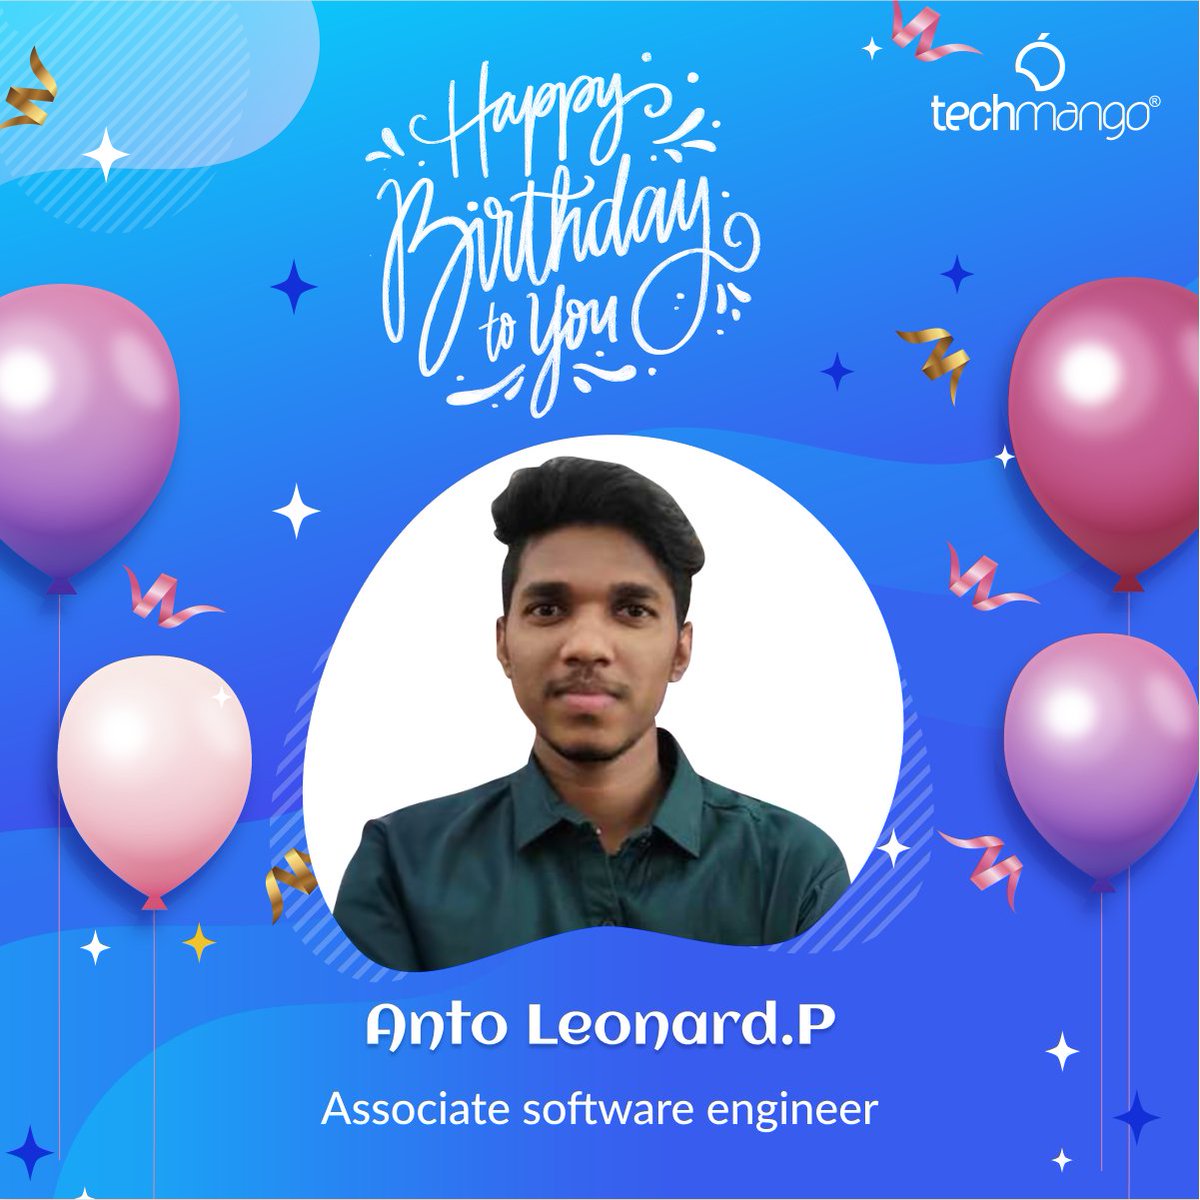 Techmango Wishes Happy Birthday to Anto Leonard

May this birthday be the beginning of an incredible journey towards your goals and aspirations.

#happybirthday #birthdaycelebration #birthday #happy #gift #celebration #birthdaywish #cakecutting #techmango #happyday #happiness